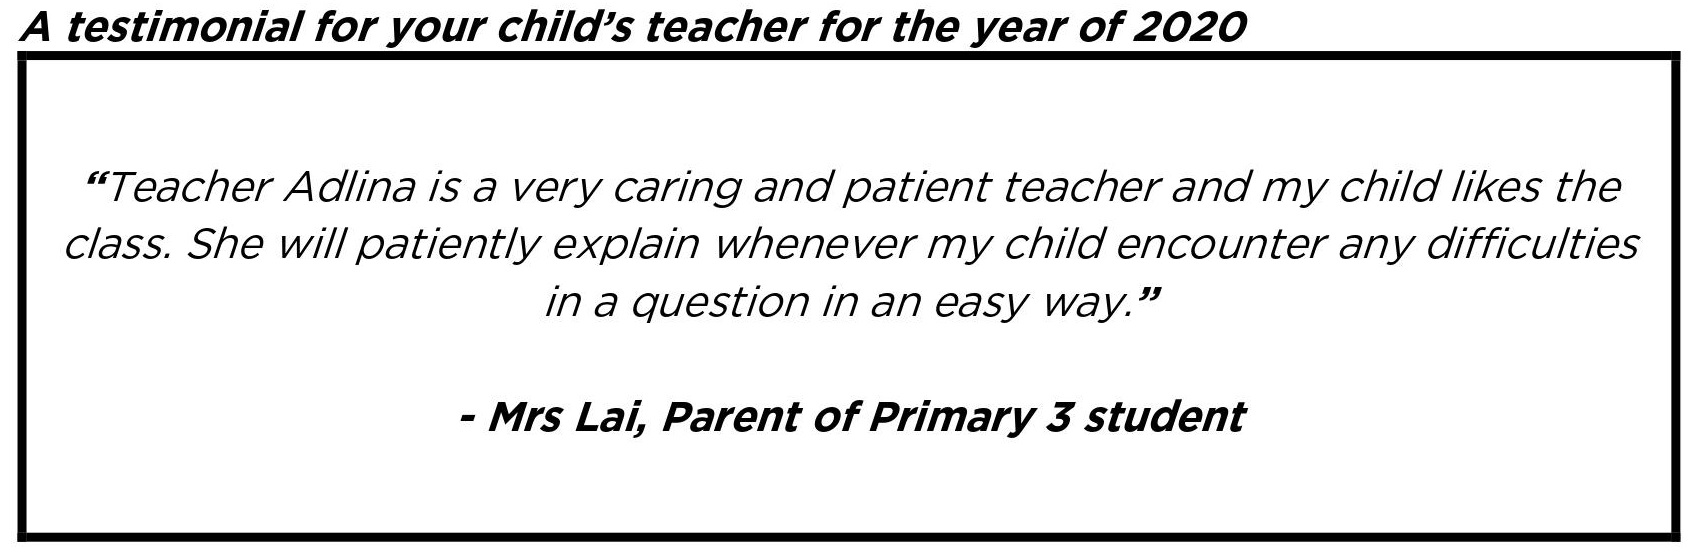 “...a very caring and patient teacher and my child likes the class.”